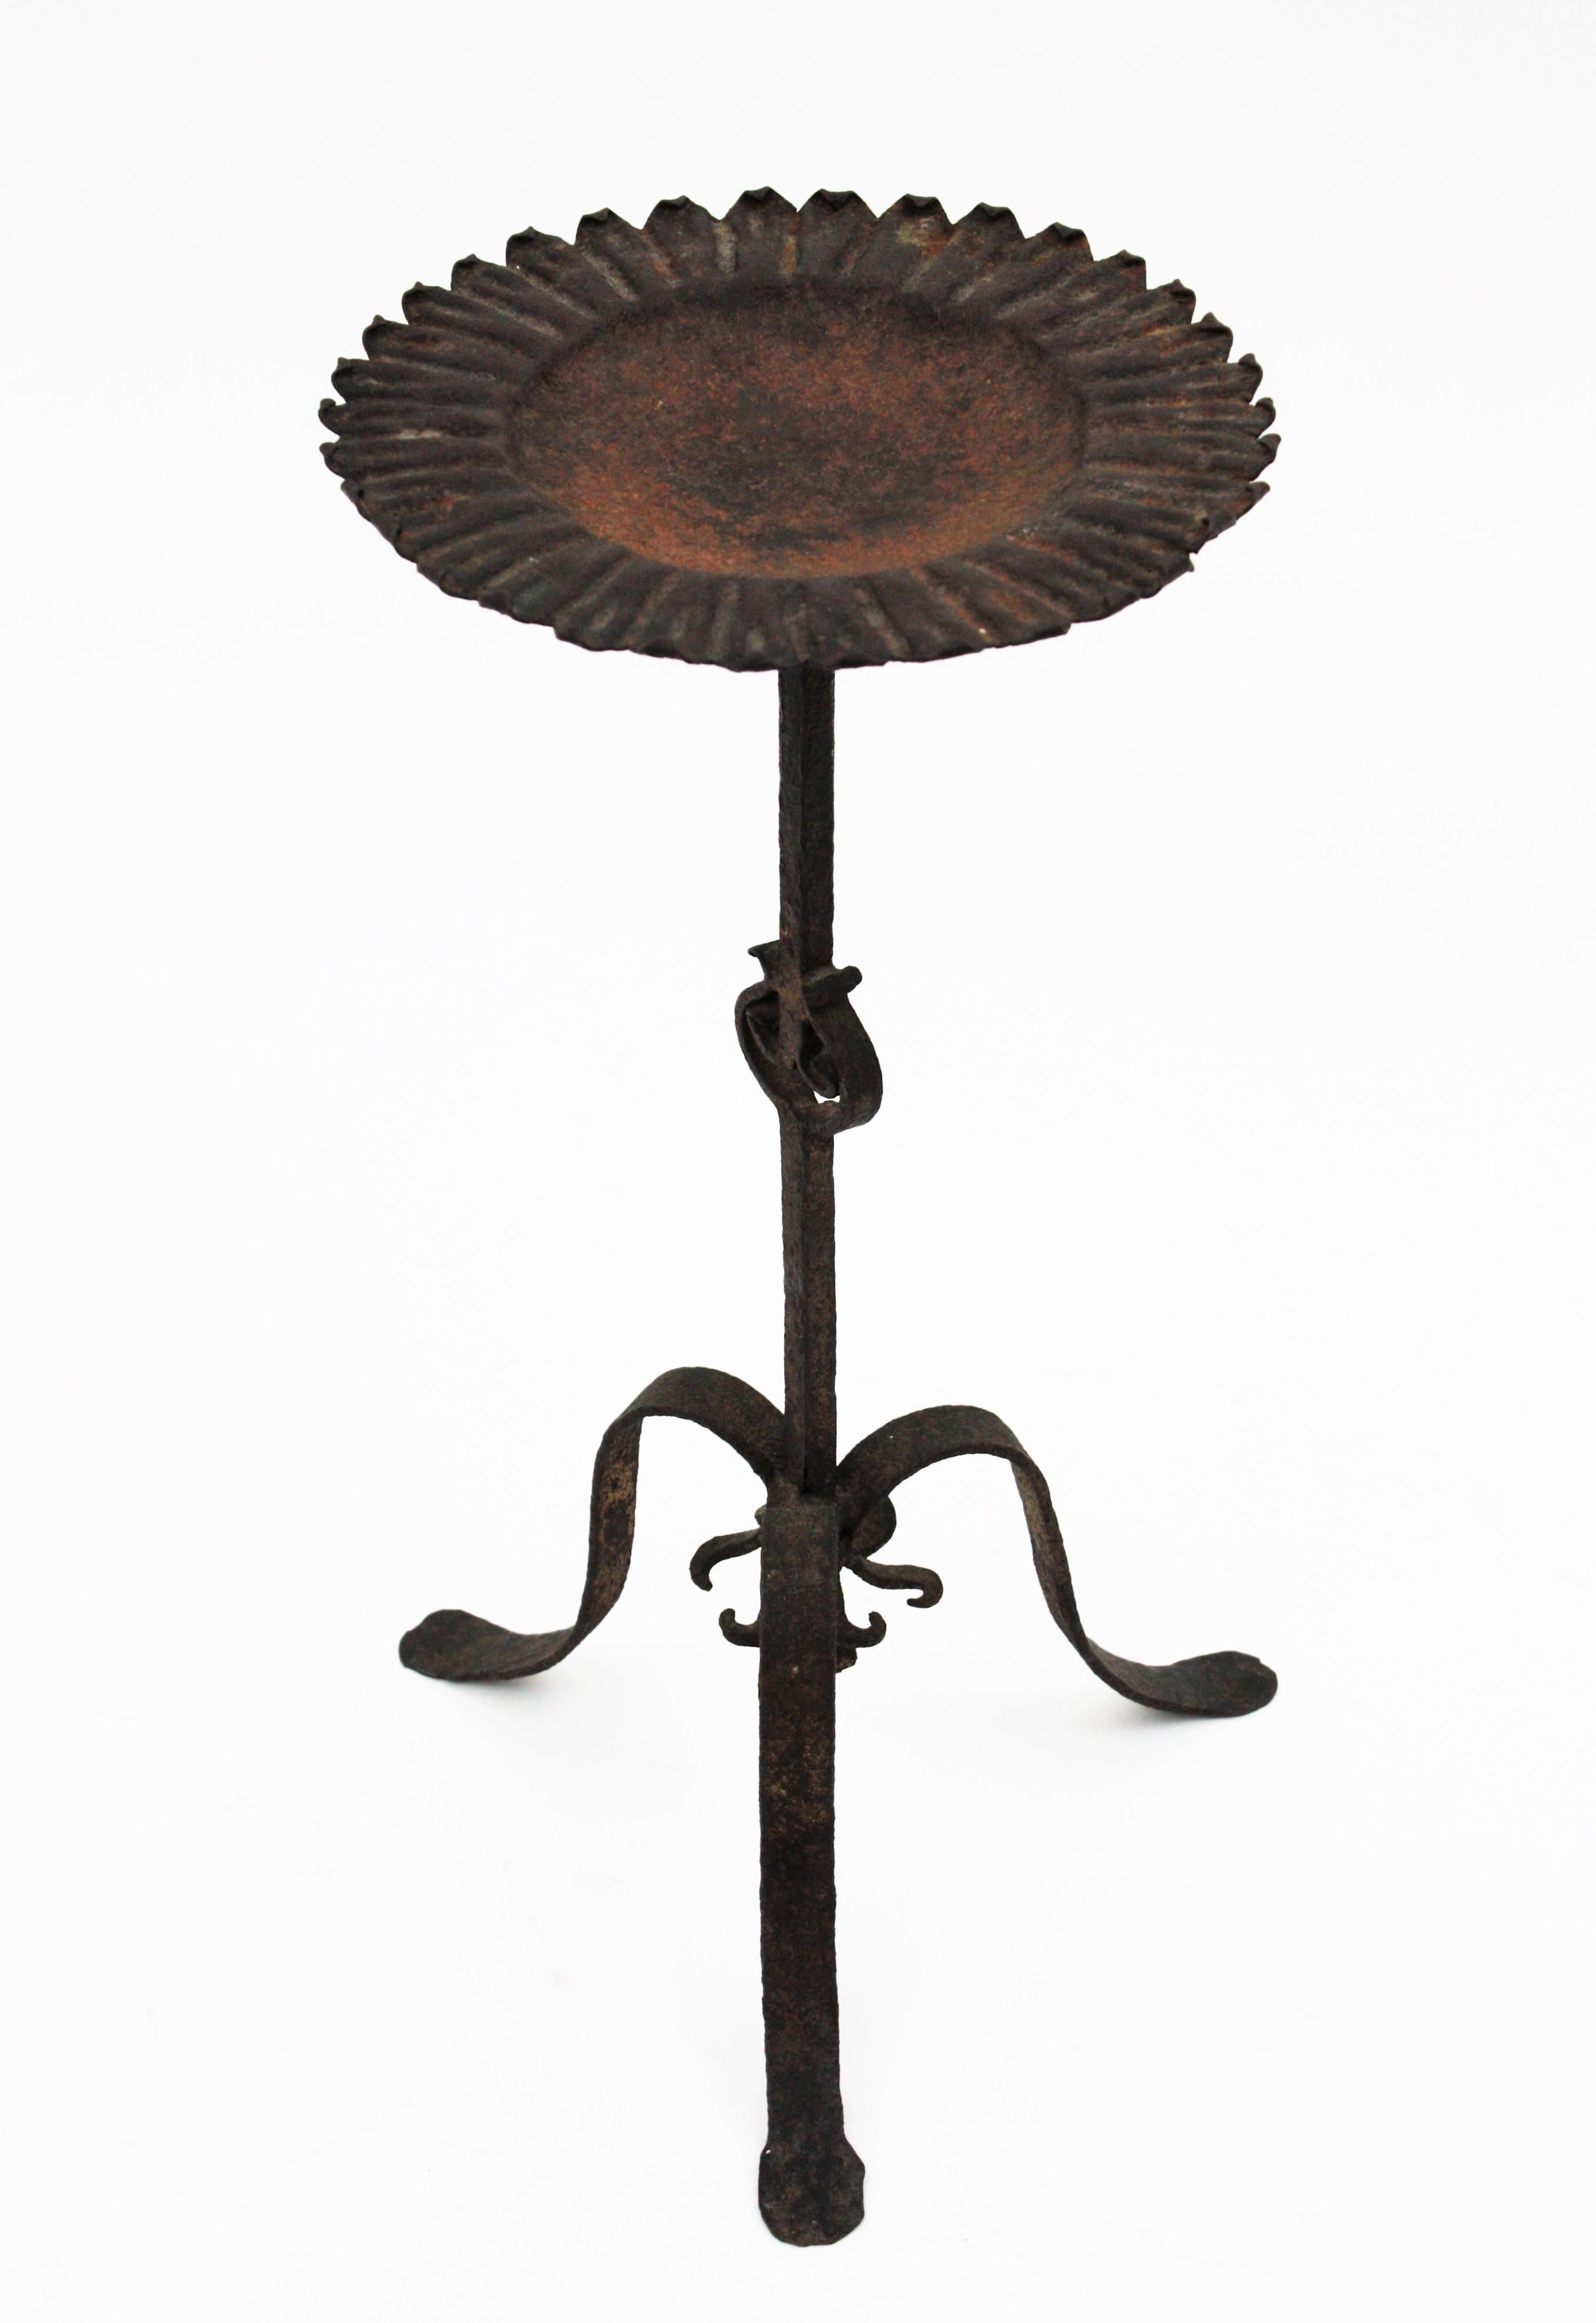 Spanish wrought iron gueridon end table / cocktails table standing on a tripod base, Spain, 1940s.
Handcrafted in wrought iron. The top of this pedestal table has a wavy edge standing on a tripod base with decorative details on the stem. Terrific